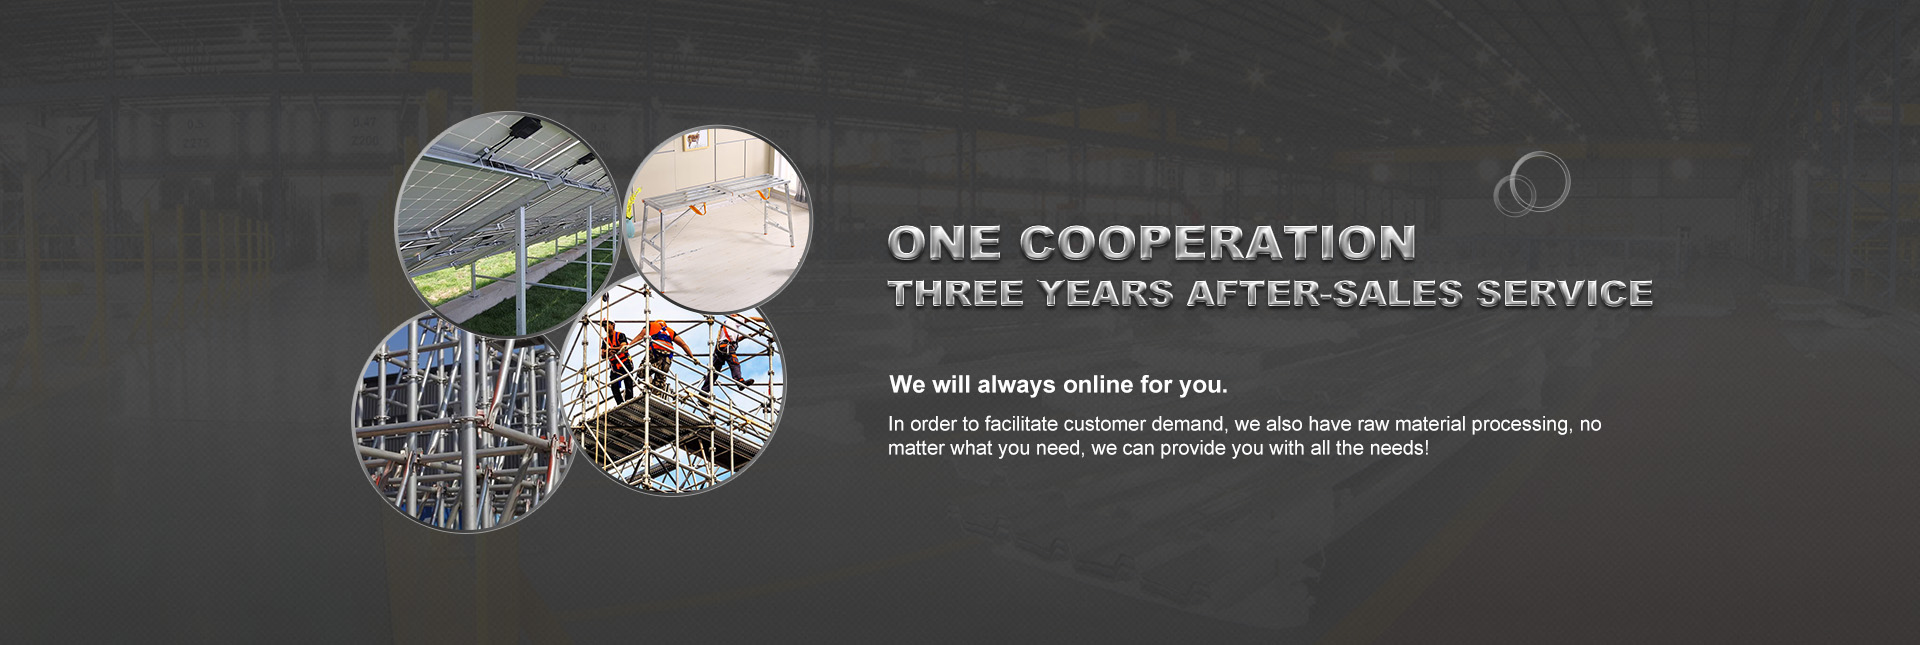 One cooperation, three years after-sales service